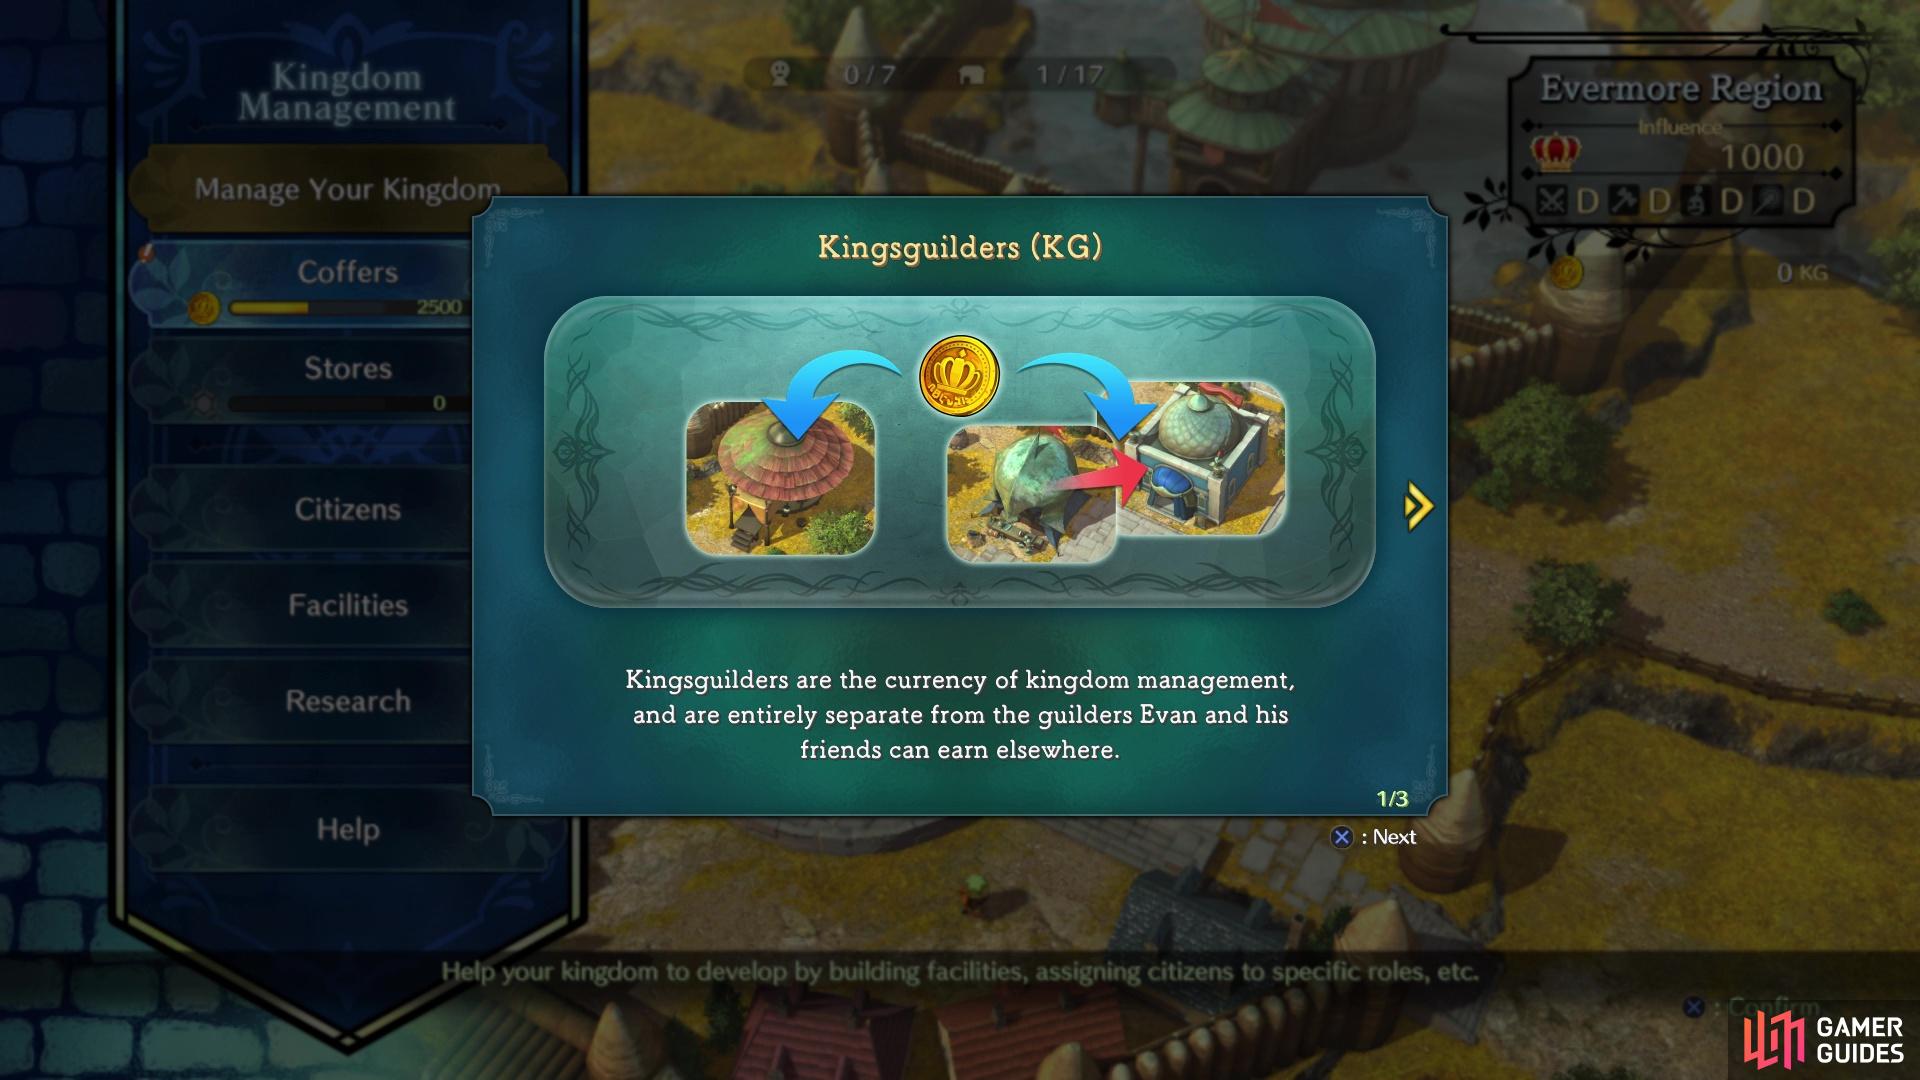 Kingsguilders will be your currency for building your kingdom